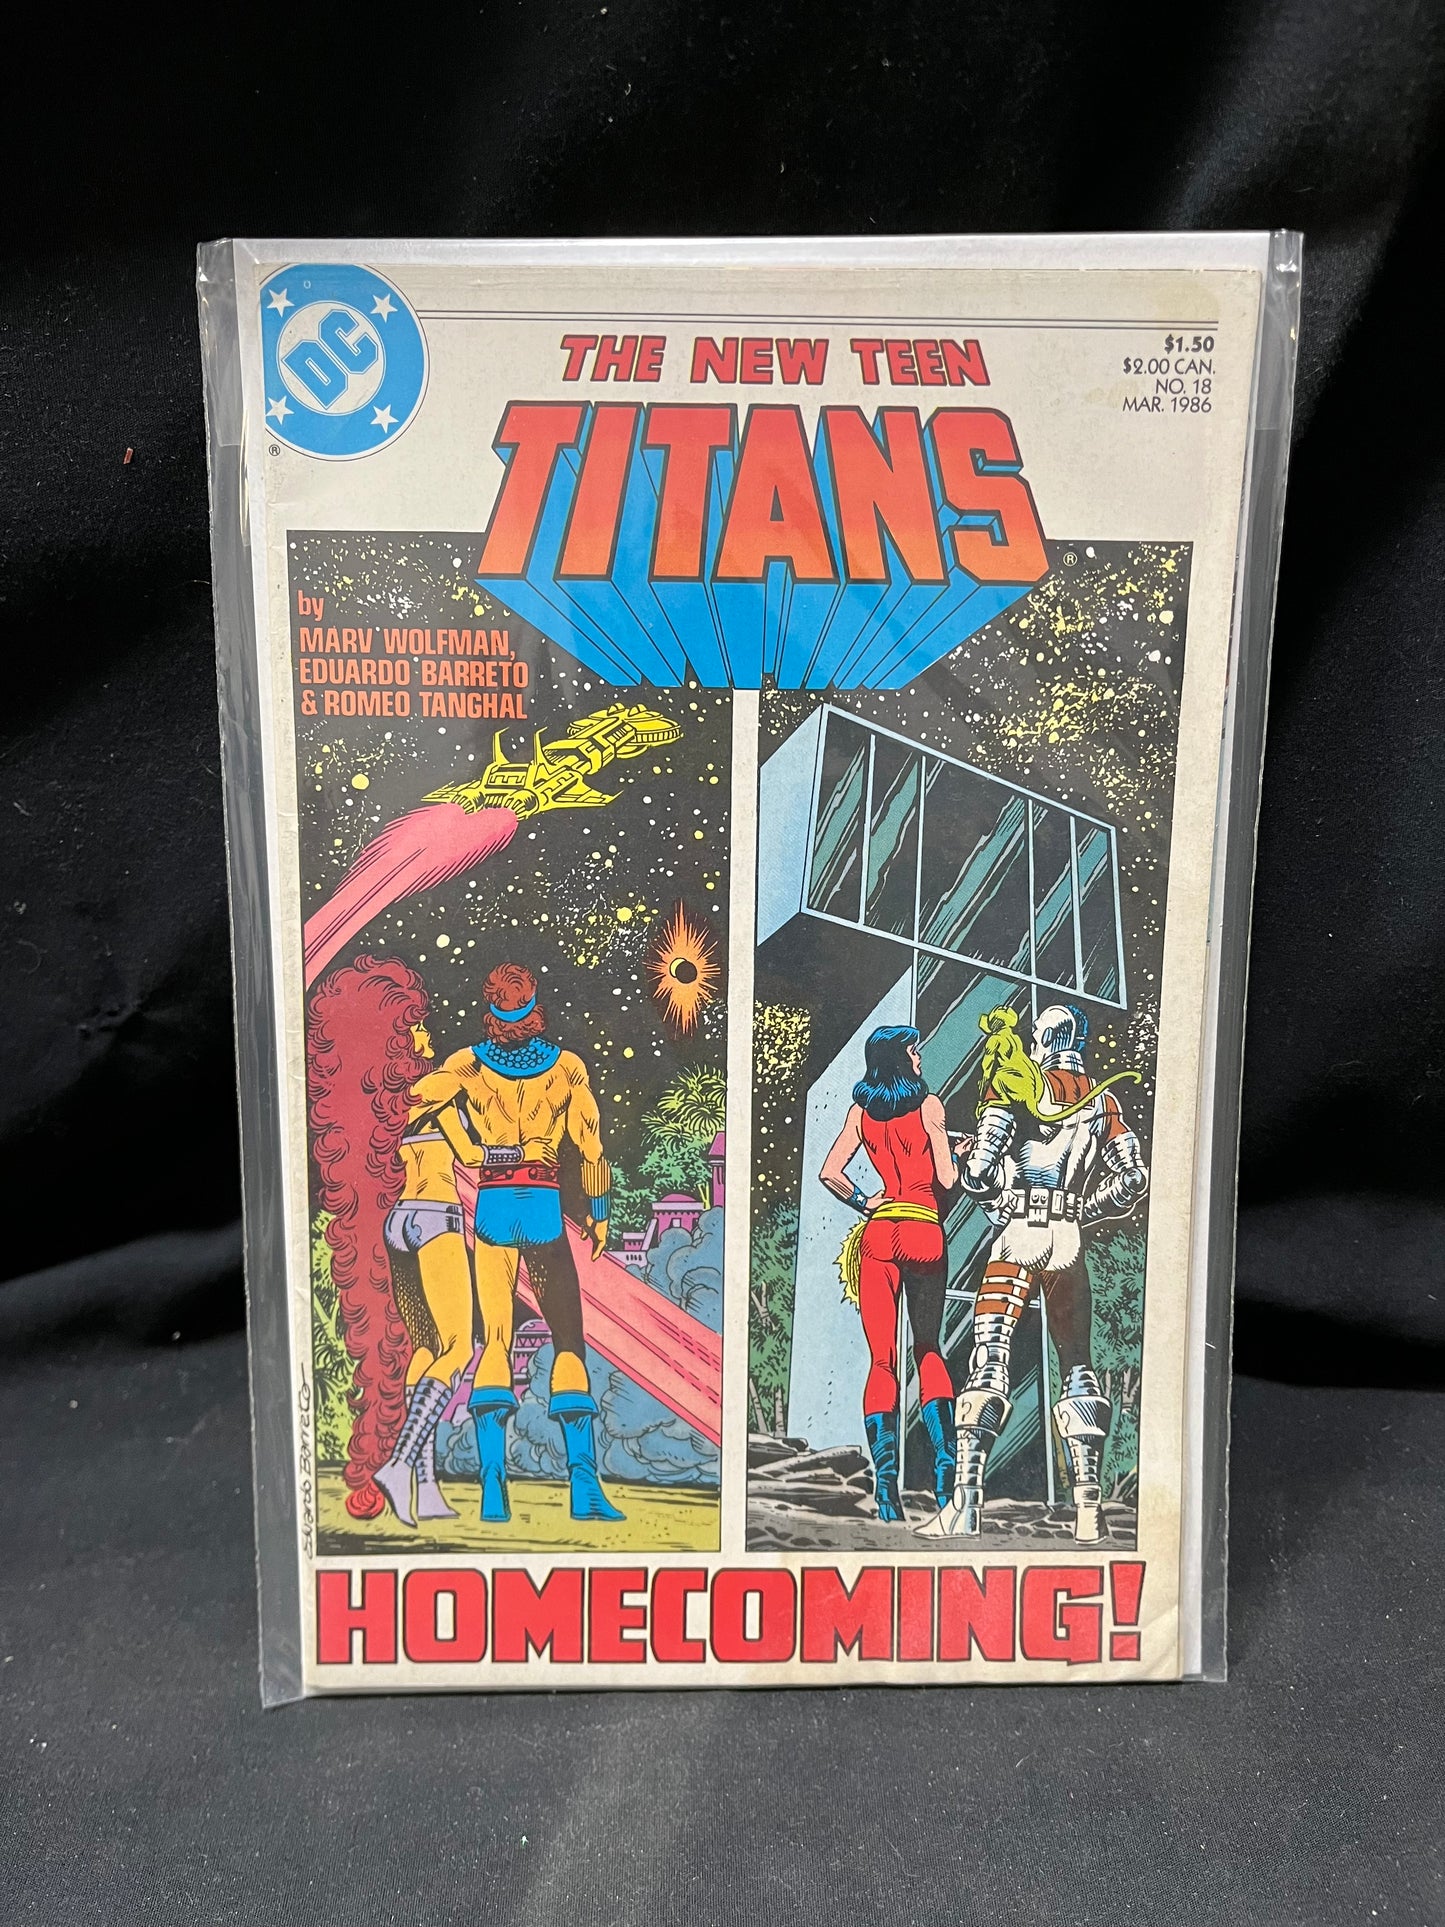 The New Teen Titans Comic Book - No. 18 Homecoming!